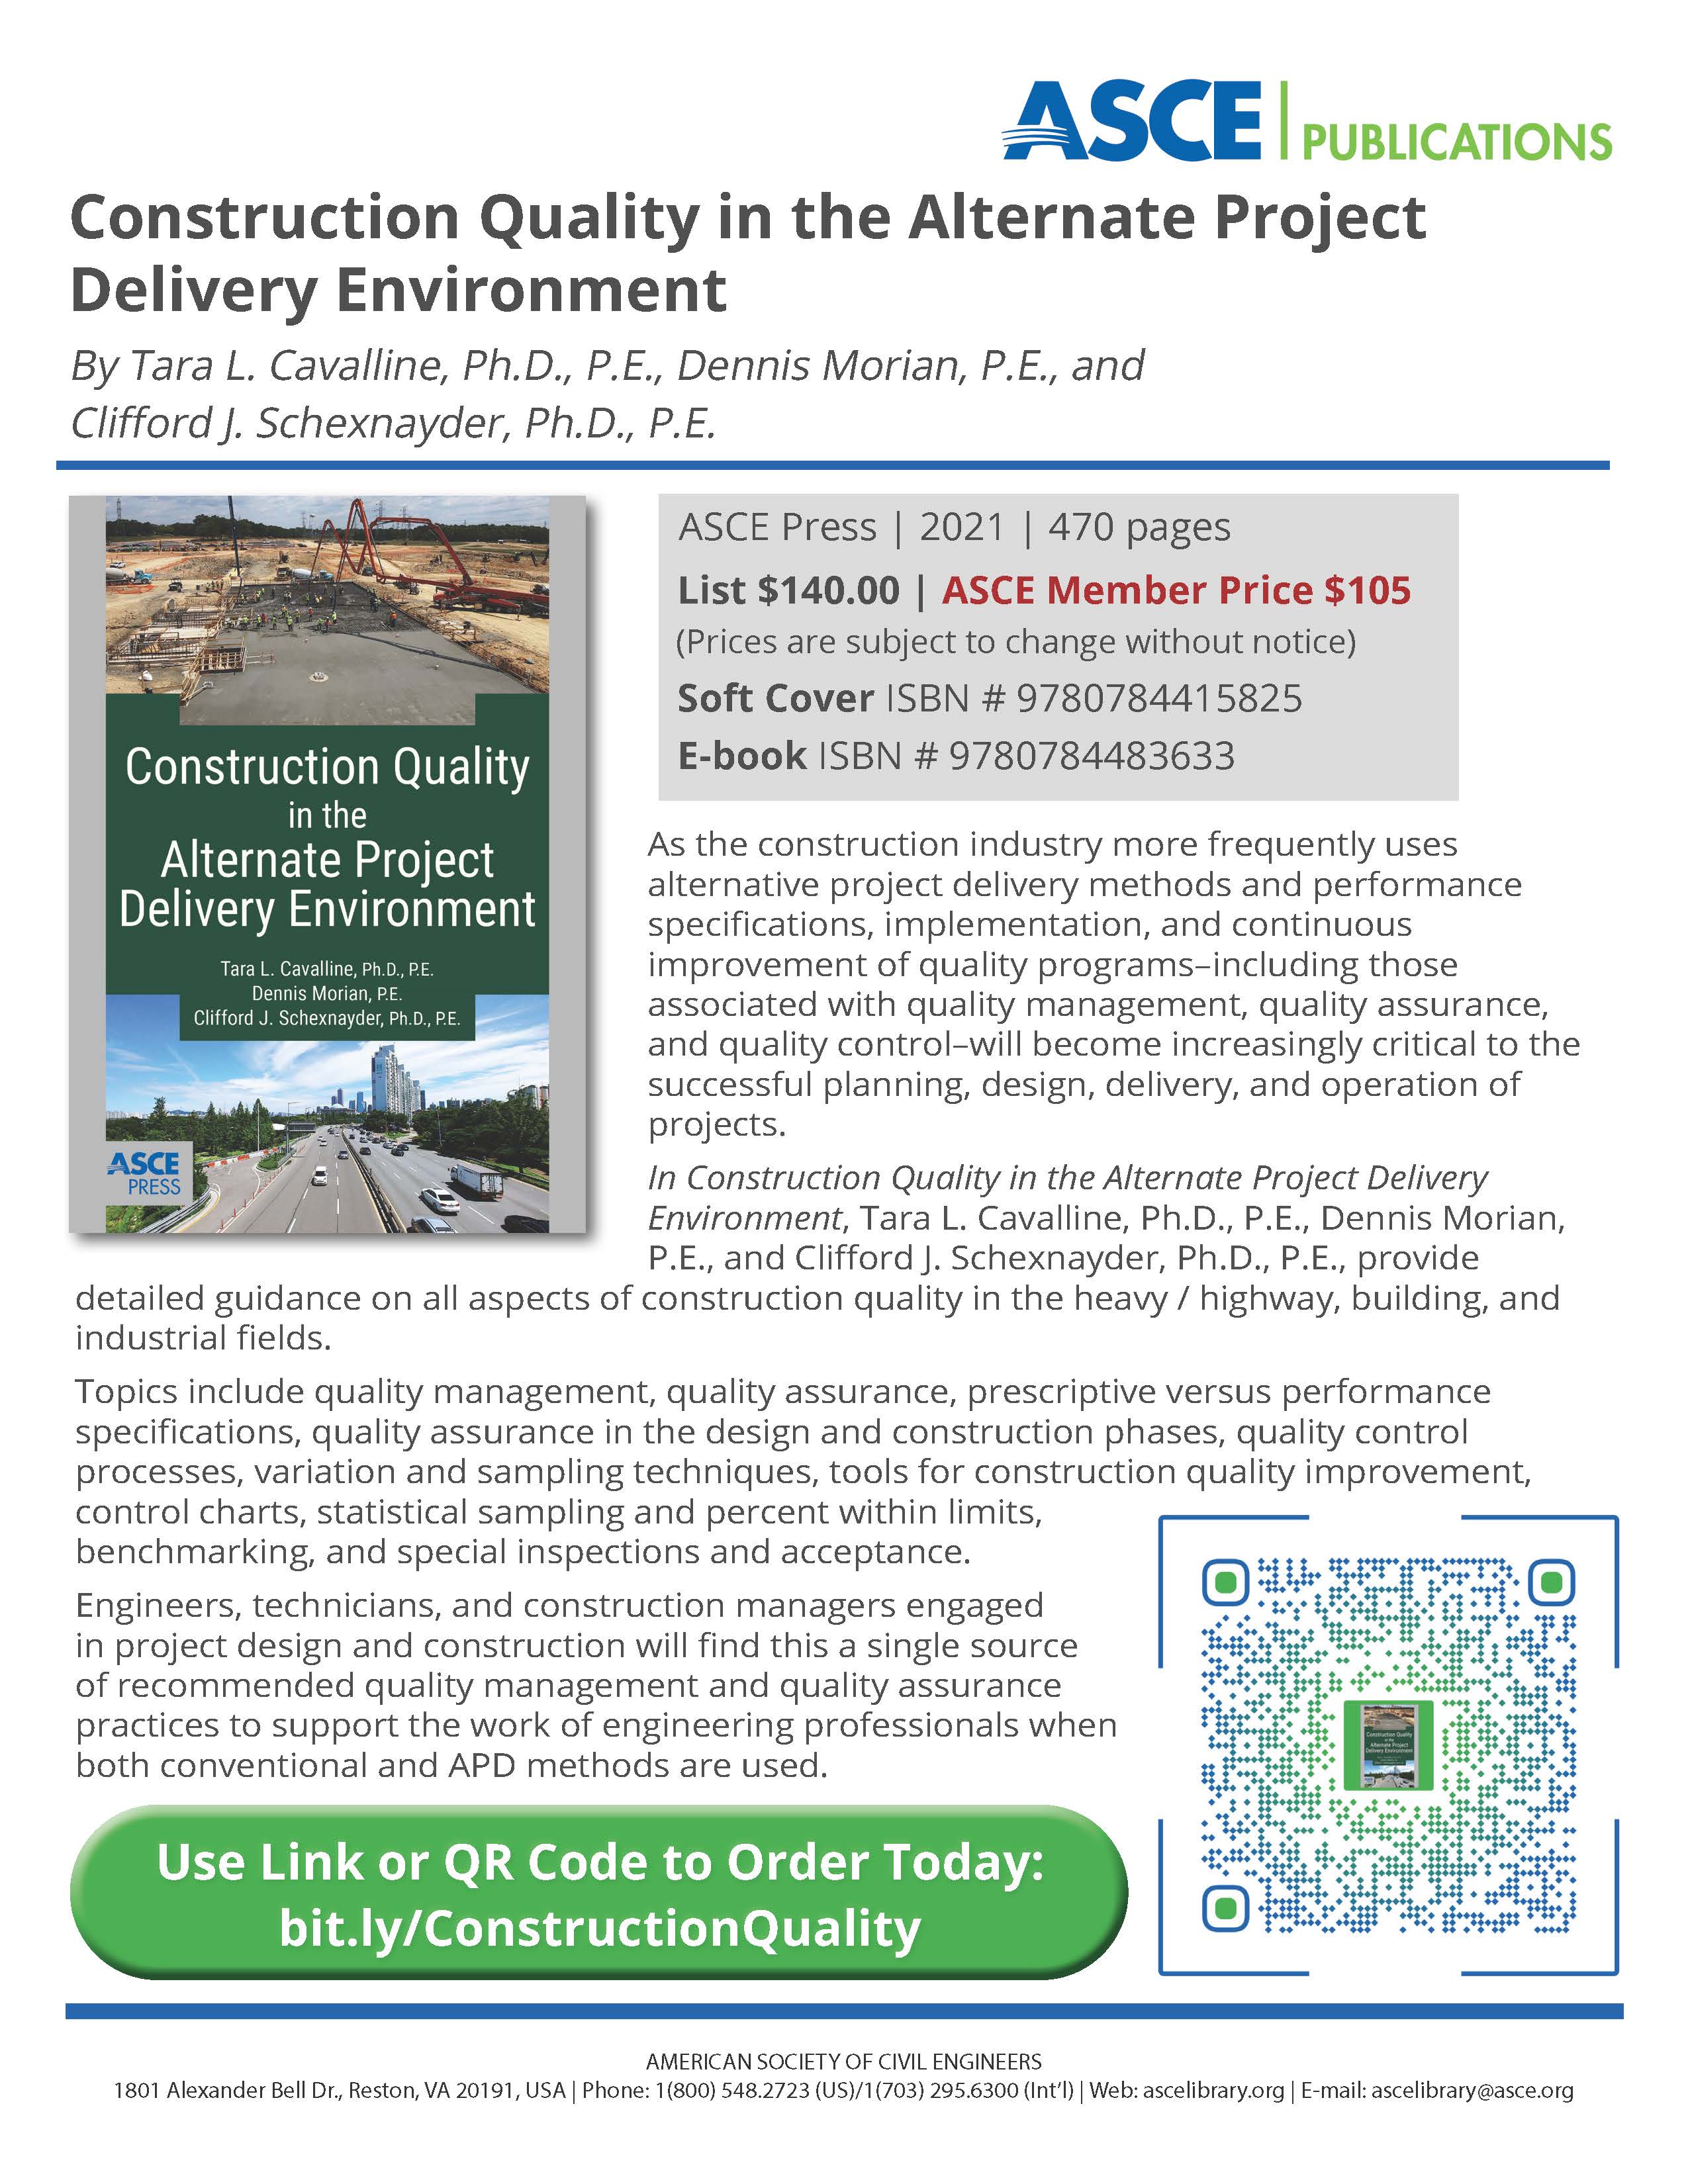 Buy the Book! Construction Quality in the Alternate Project Delivery Environment